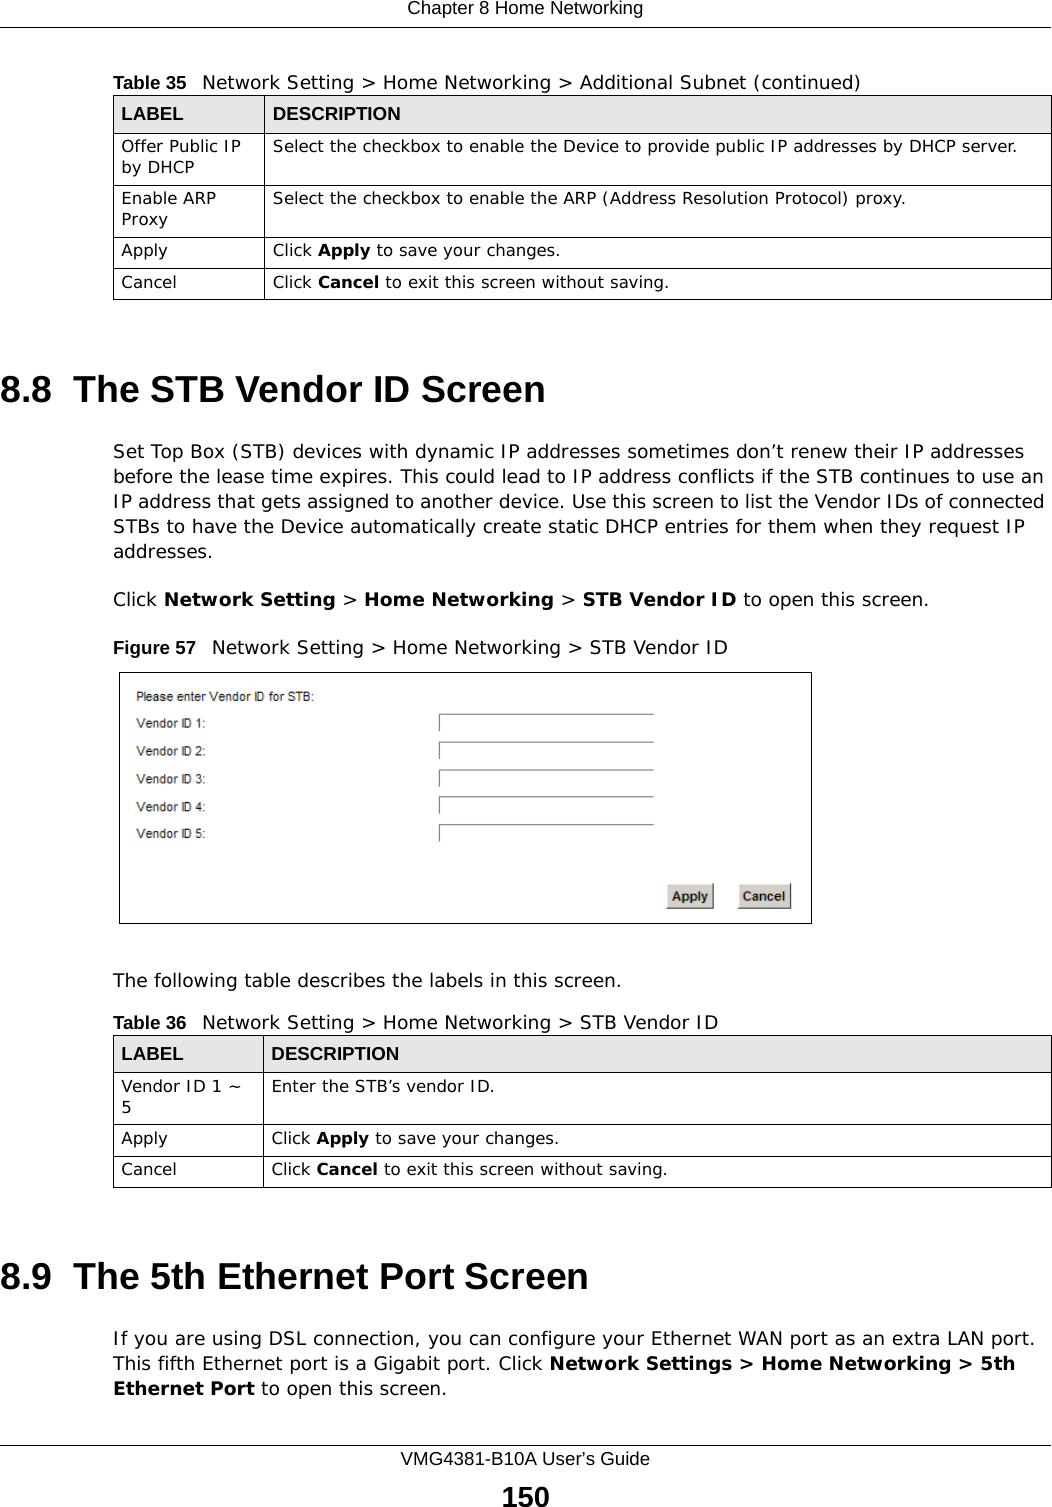 Chapter 8 Home NetworkingVMG4381-B10A User’s Guide1508.8  The STB Vendor ID ScreenSet Top Box (STB) devices with dynamic IP addresses sometimes don’t renew their IP addresses before the lease time expires. This could lead to IP address conflicts if the STB continues to use an IP address that gets assigned to another device. Use this screen to list the Vendor IDs of connected STBs to have the Device automatically create static DHCP entries for them when they request IP addresses.Click Network Setting &gt; Home Networking &gt; STB Vendor ID to open this screen. Figure 57   Network Setting &gt; Home Networking &gt; STB Vendor IDThe following table describes the labels in this screen. 8.9  The 5th Ethernet Port ScreenIf you are using DSL connection, you can configure your Ethernet WAN port as an extra LAN port. This fifth Ethernet port is a Gigabit port. Click Network Settings &gt; Home Networking &gt; 5th Ethernet Port to open this screen.Offer Public IP by DHCP Select the checkbox to enable the Device to provide public IP addresses by DHCP server.Enable ARP Proxy Select the checkbox to enable the ARP (Address Resolution Protocol) proxy.Apply Click Apply to save your changes.Cancel Click Cancel to exit this screen without saving.Table 35   Network Setting &gt; Home Networking &gt; Additional Subnet (continued)LABEL DESCRIPTIONTable 36   Network Setting &gt; Home Networking &gt; STB Vendor IDLABEL DESCRIPTIONVendor ID 1 ~ 5Enter the STB’s vendor ID.Apply Click Apply to save your changes.Cancel Click Cancel to exit this screen without saving.